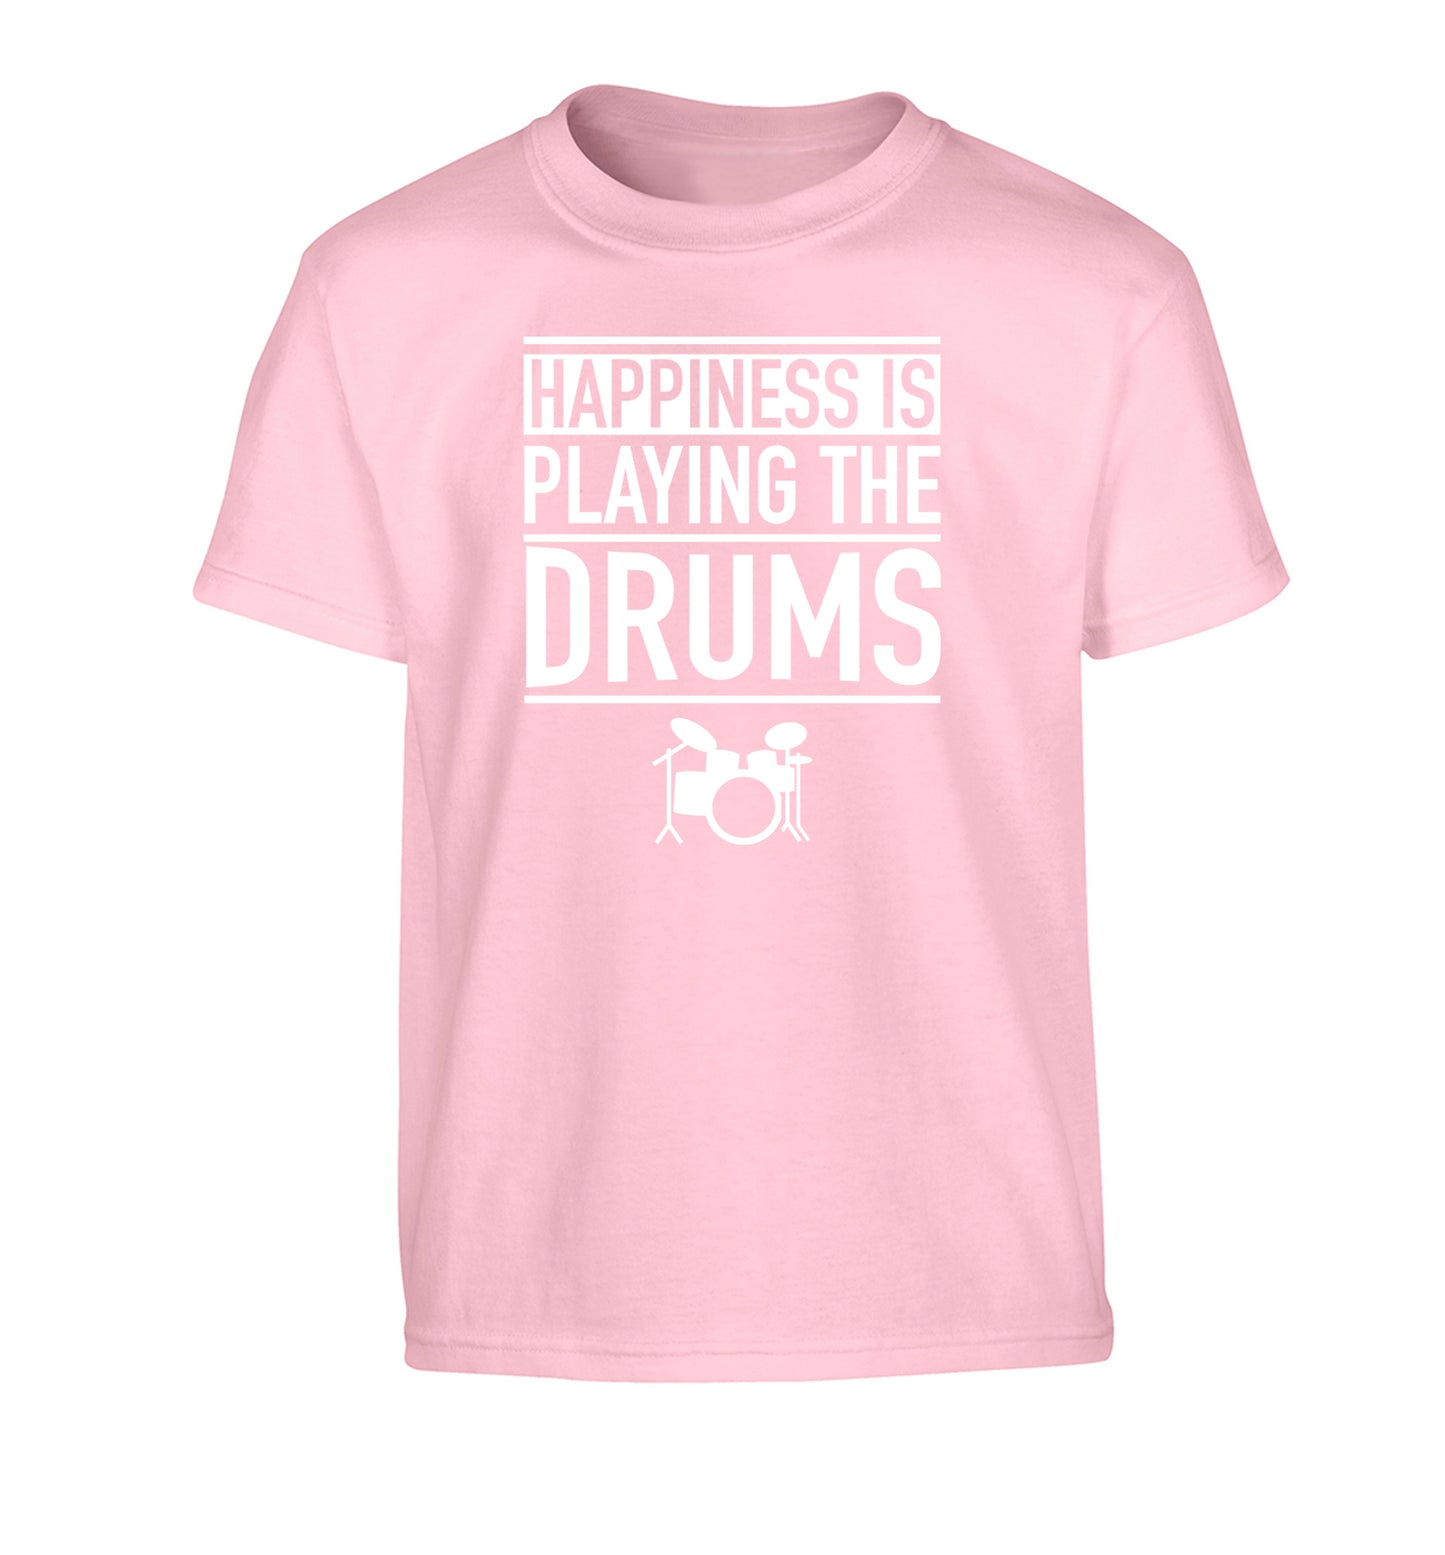 Happiness is playing the drums Children's light pink Tshirt 12-14 Years